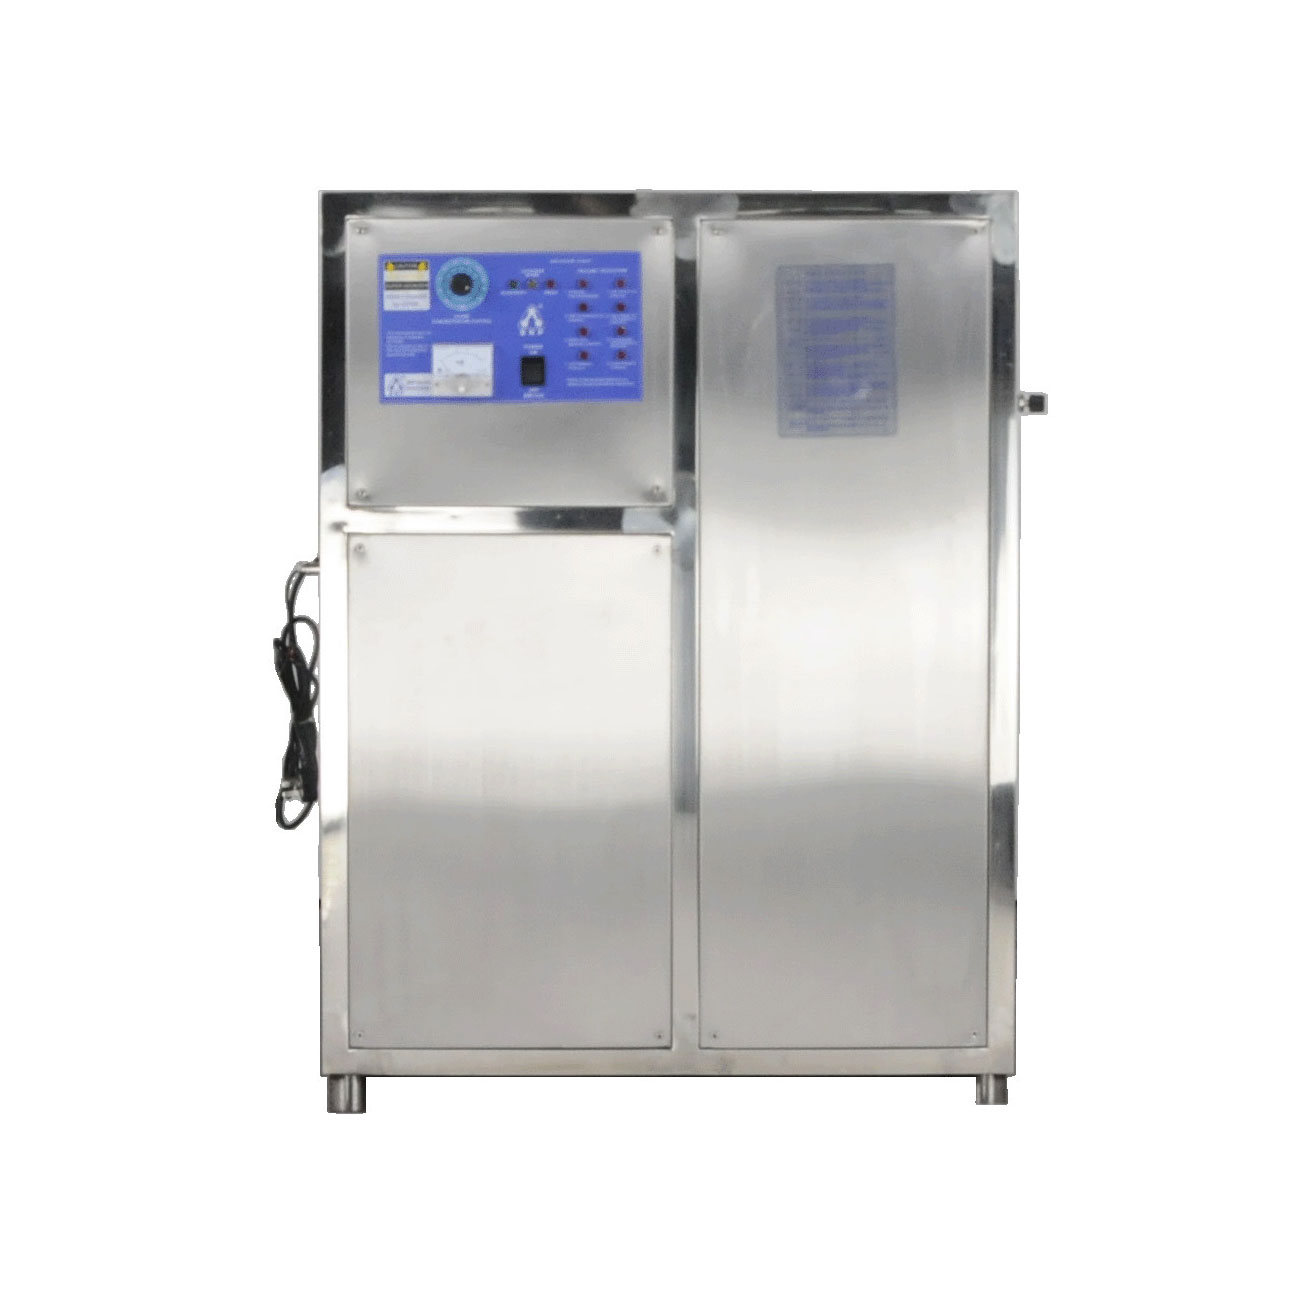 Bottom price Ozone Generator Oxygen Generator - Reliable Supplier China BNP SOZ-YW-200G Industrial Oxygen-Enriched Ozone Generator for Public Place Air Purifier and O3 Sterilizer Water Disinfectio...